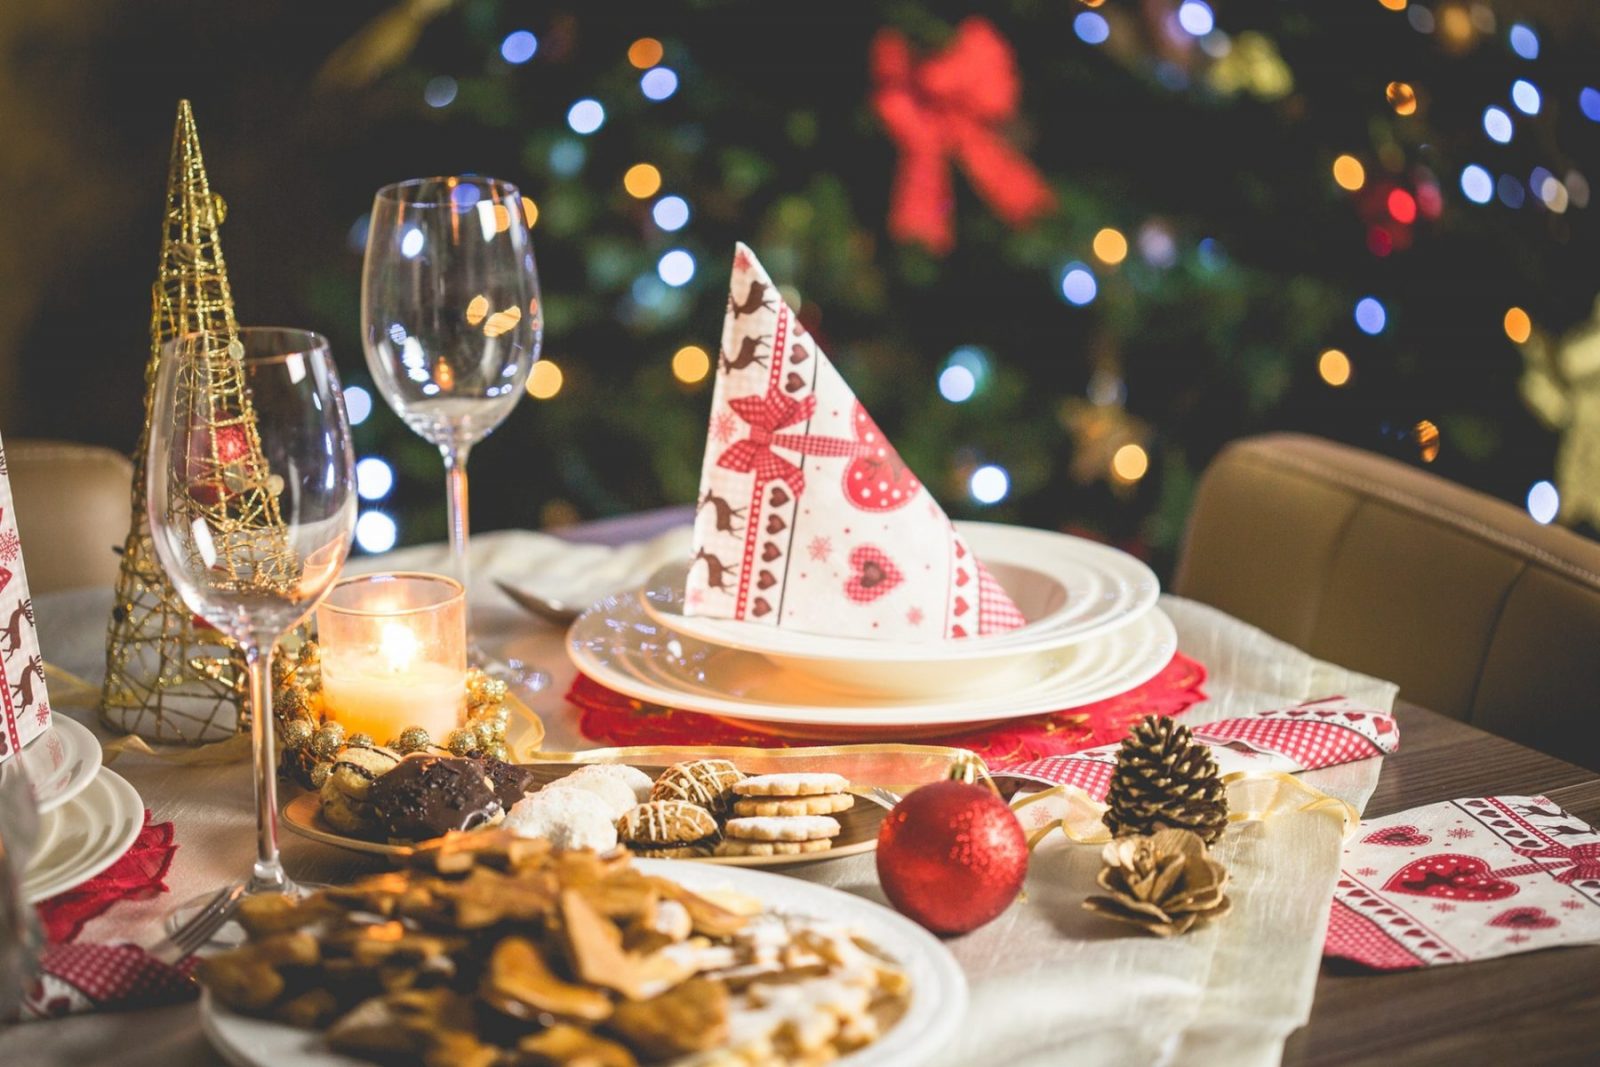 Can We Guess Your Zodiac Sign by Your Taste in Food? Quiz Christmas Food